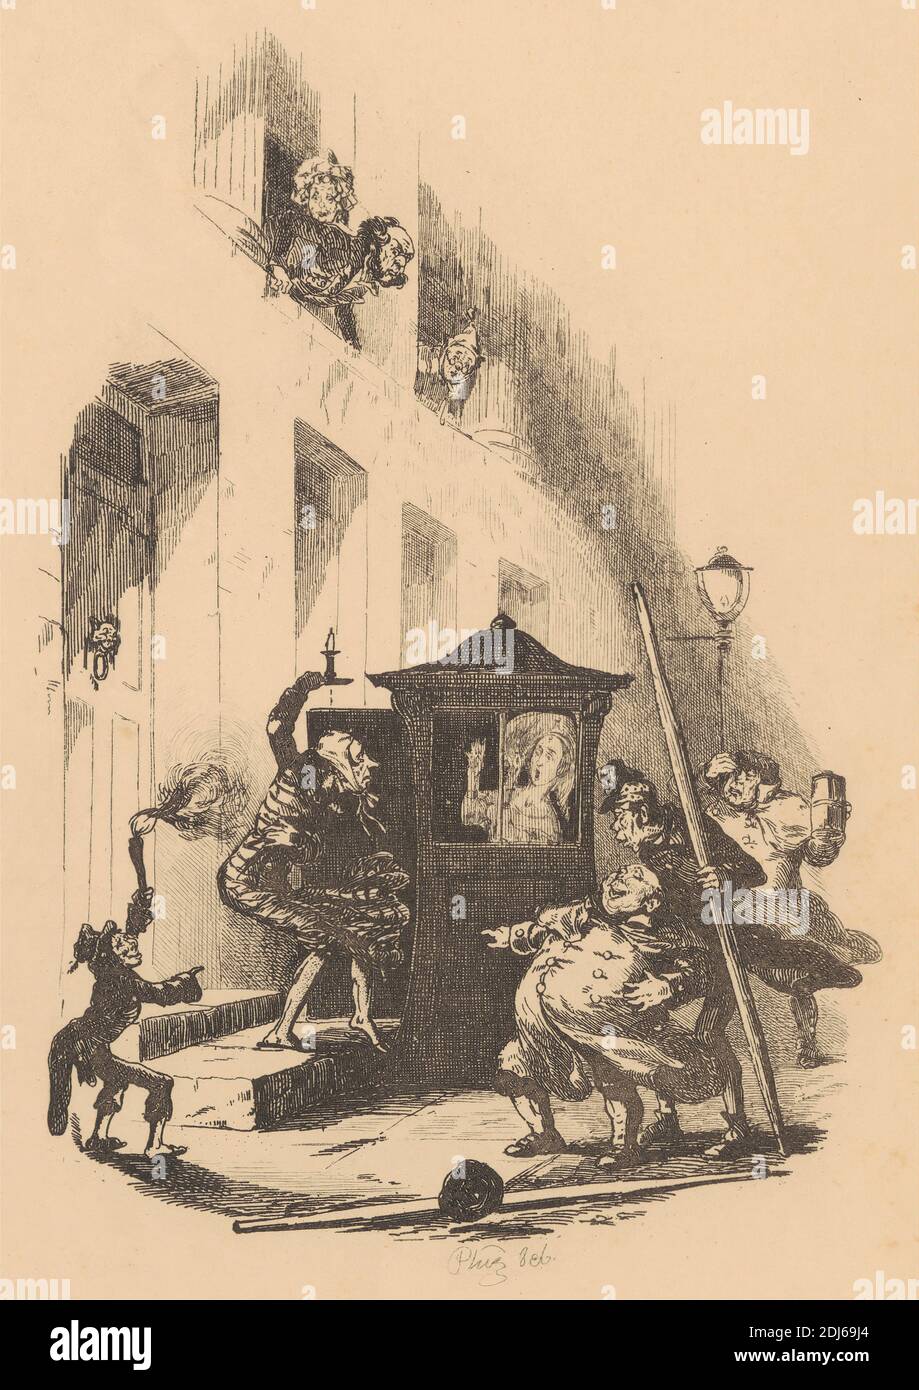 Mr. Winkle's Situation When the Door Blew To, Print made by Hablot Knight Browne, 1815–1882, British, 1837, Etching on moderately thick, slightly textured, cream wove paper Stock Photo